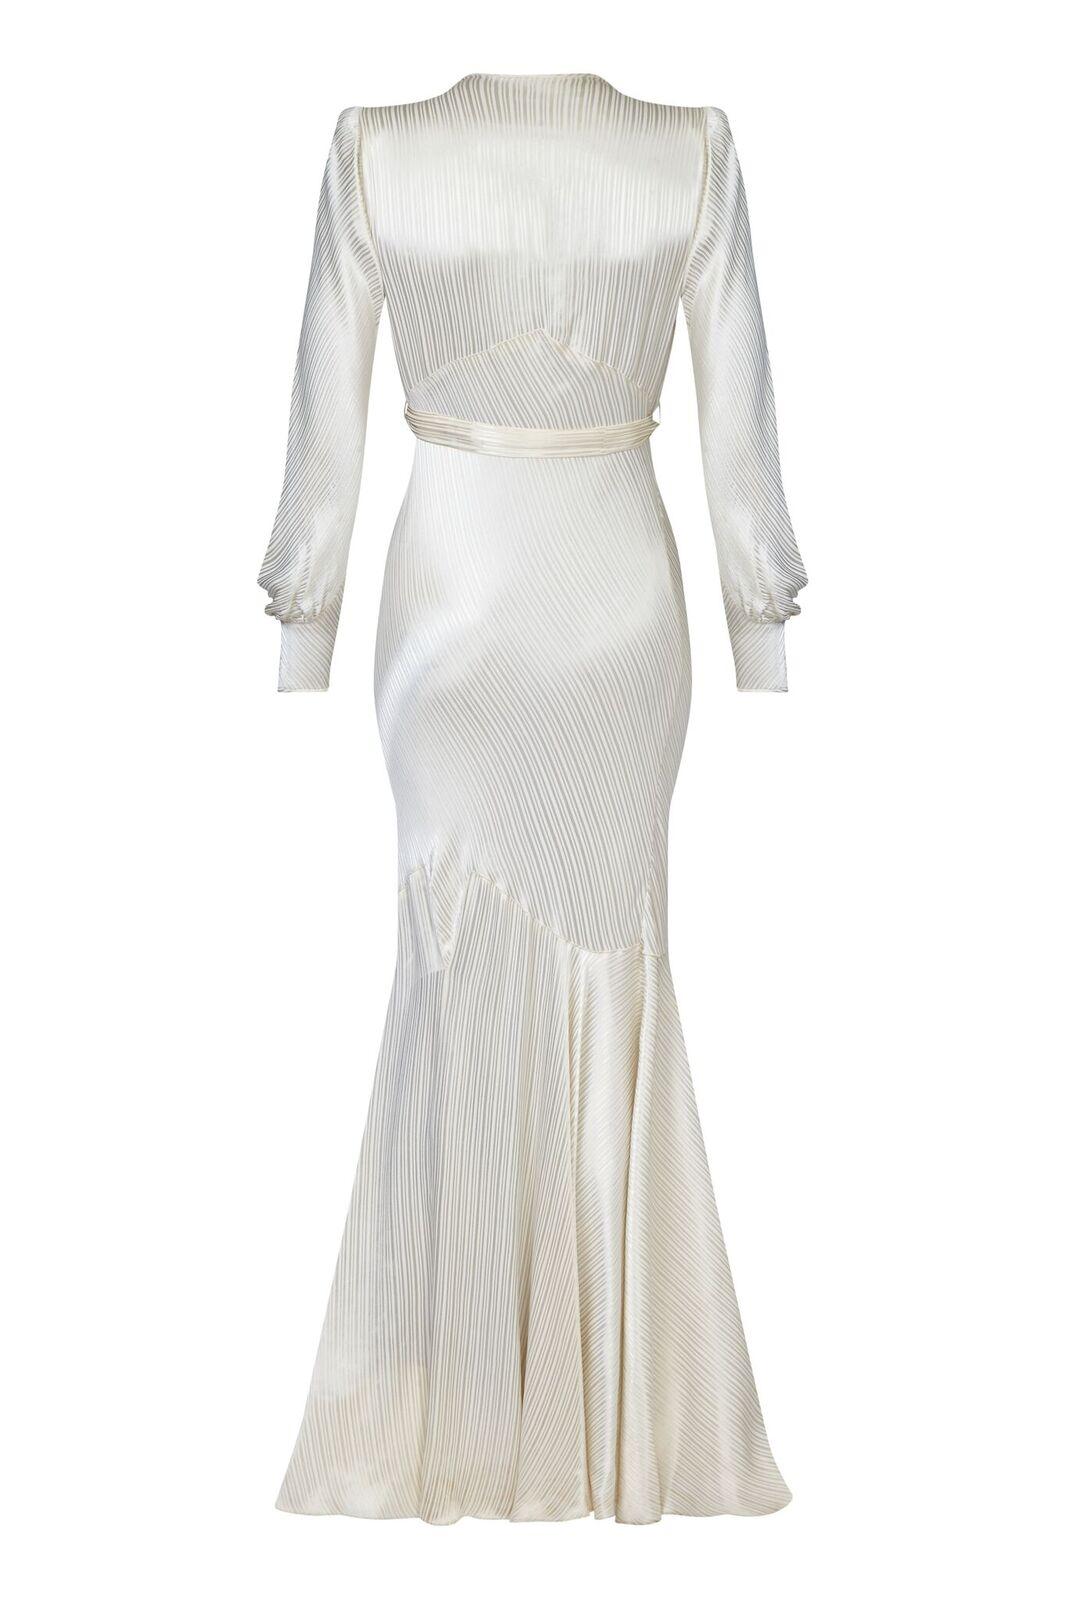 This captivating 1930s soft ivory silk satin bridal gown is absolutely breathtaking and in beautiful vintage condition. The timeless elegance of the classic hourglass silhouette and feminine design features of this piece are reminiscent of silver